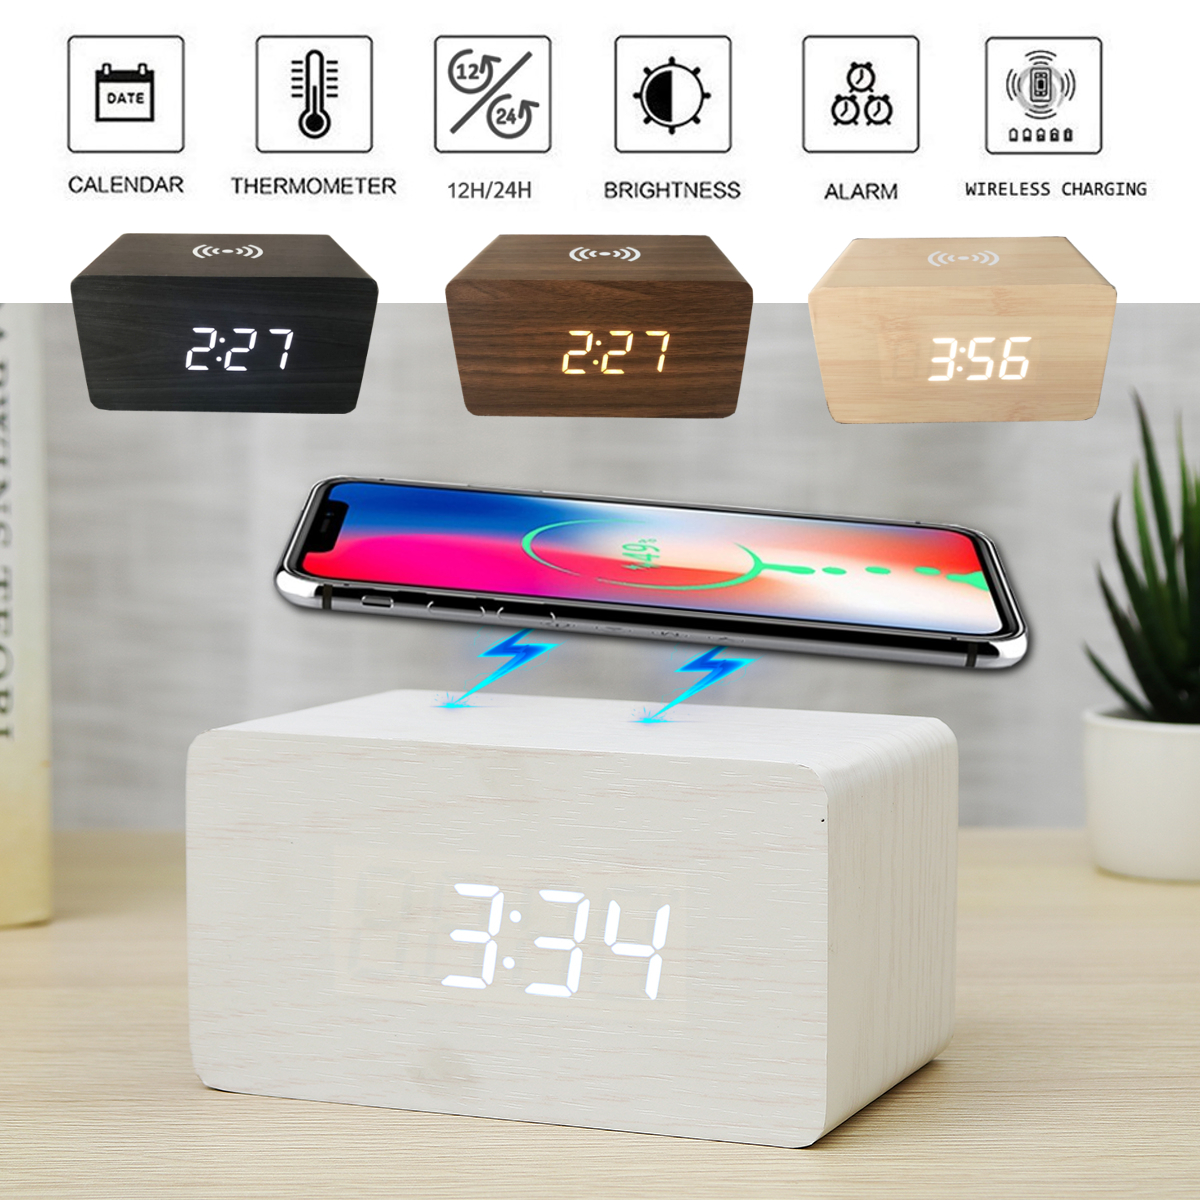 Digital-Thermometer-LED-Desk-Alarm-Clock-With--Wireless-Charger-For-Phone-1587803-1